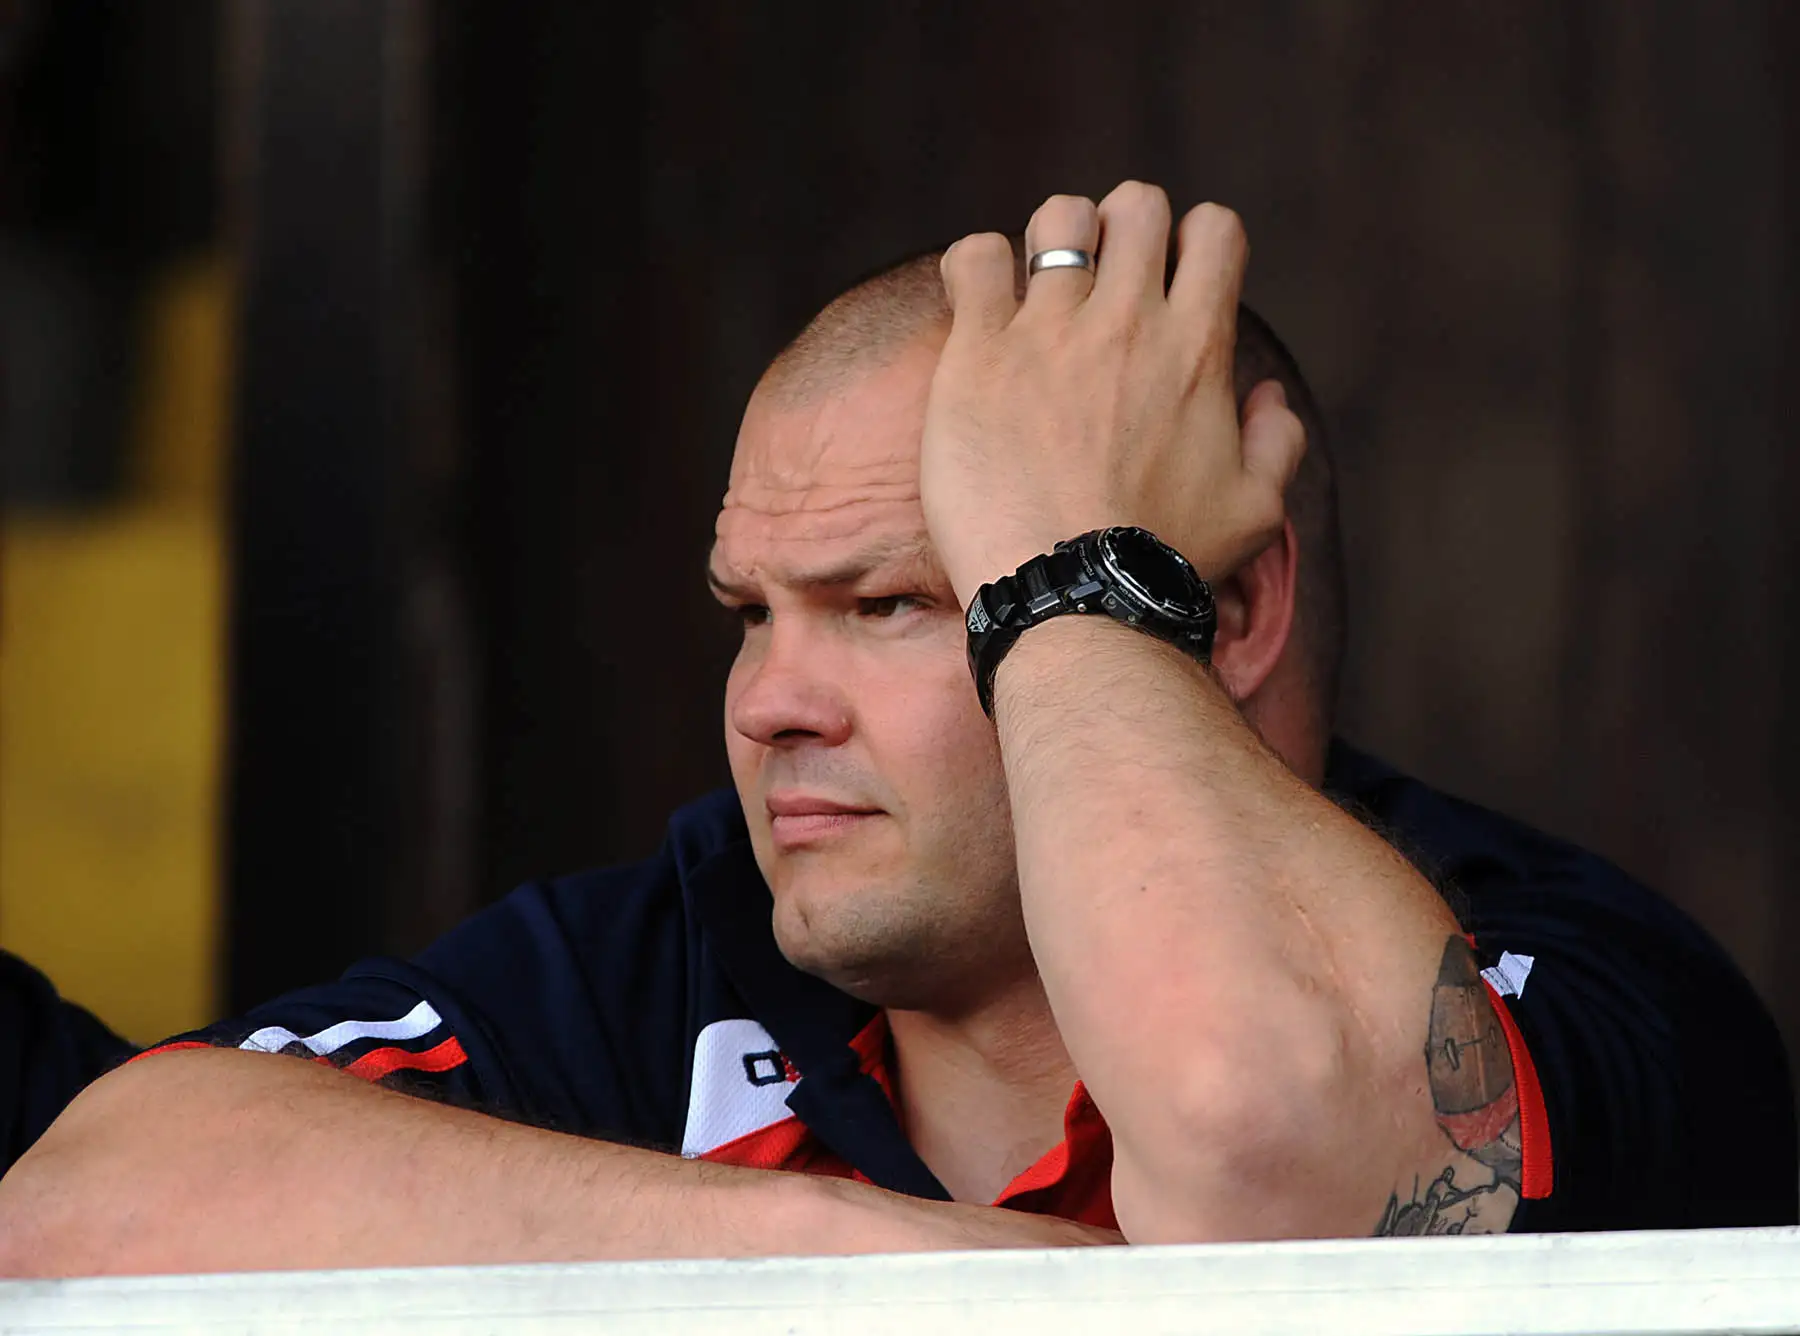 Six Tackles: Potential candidates to become new Leigh Centurions head coach